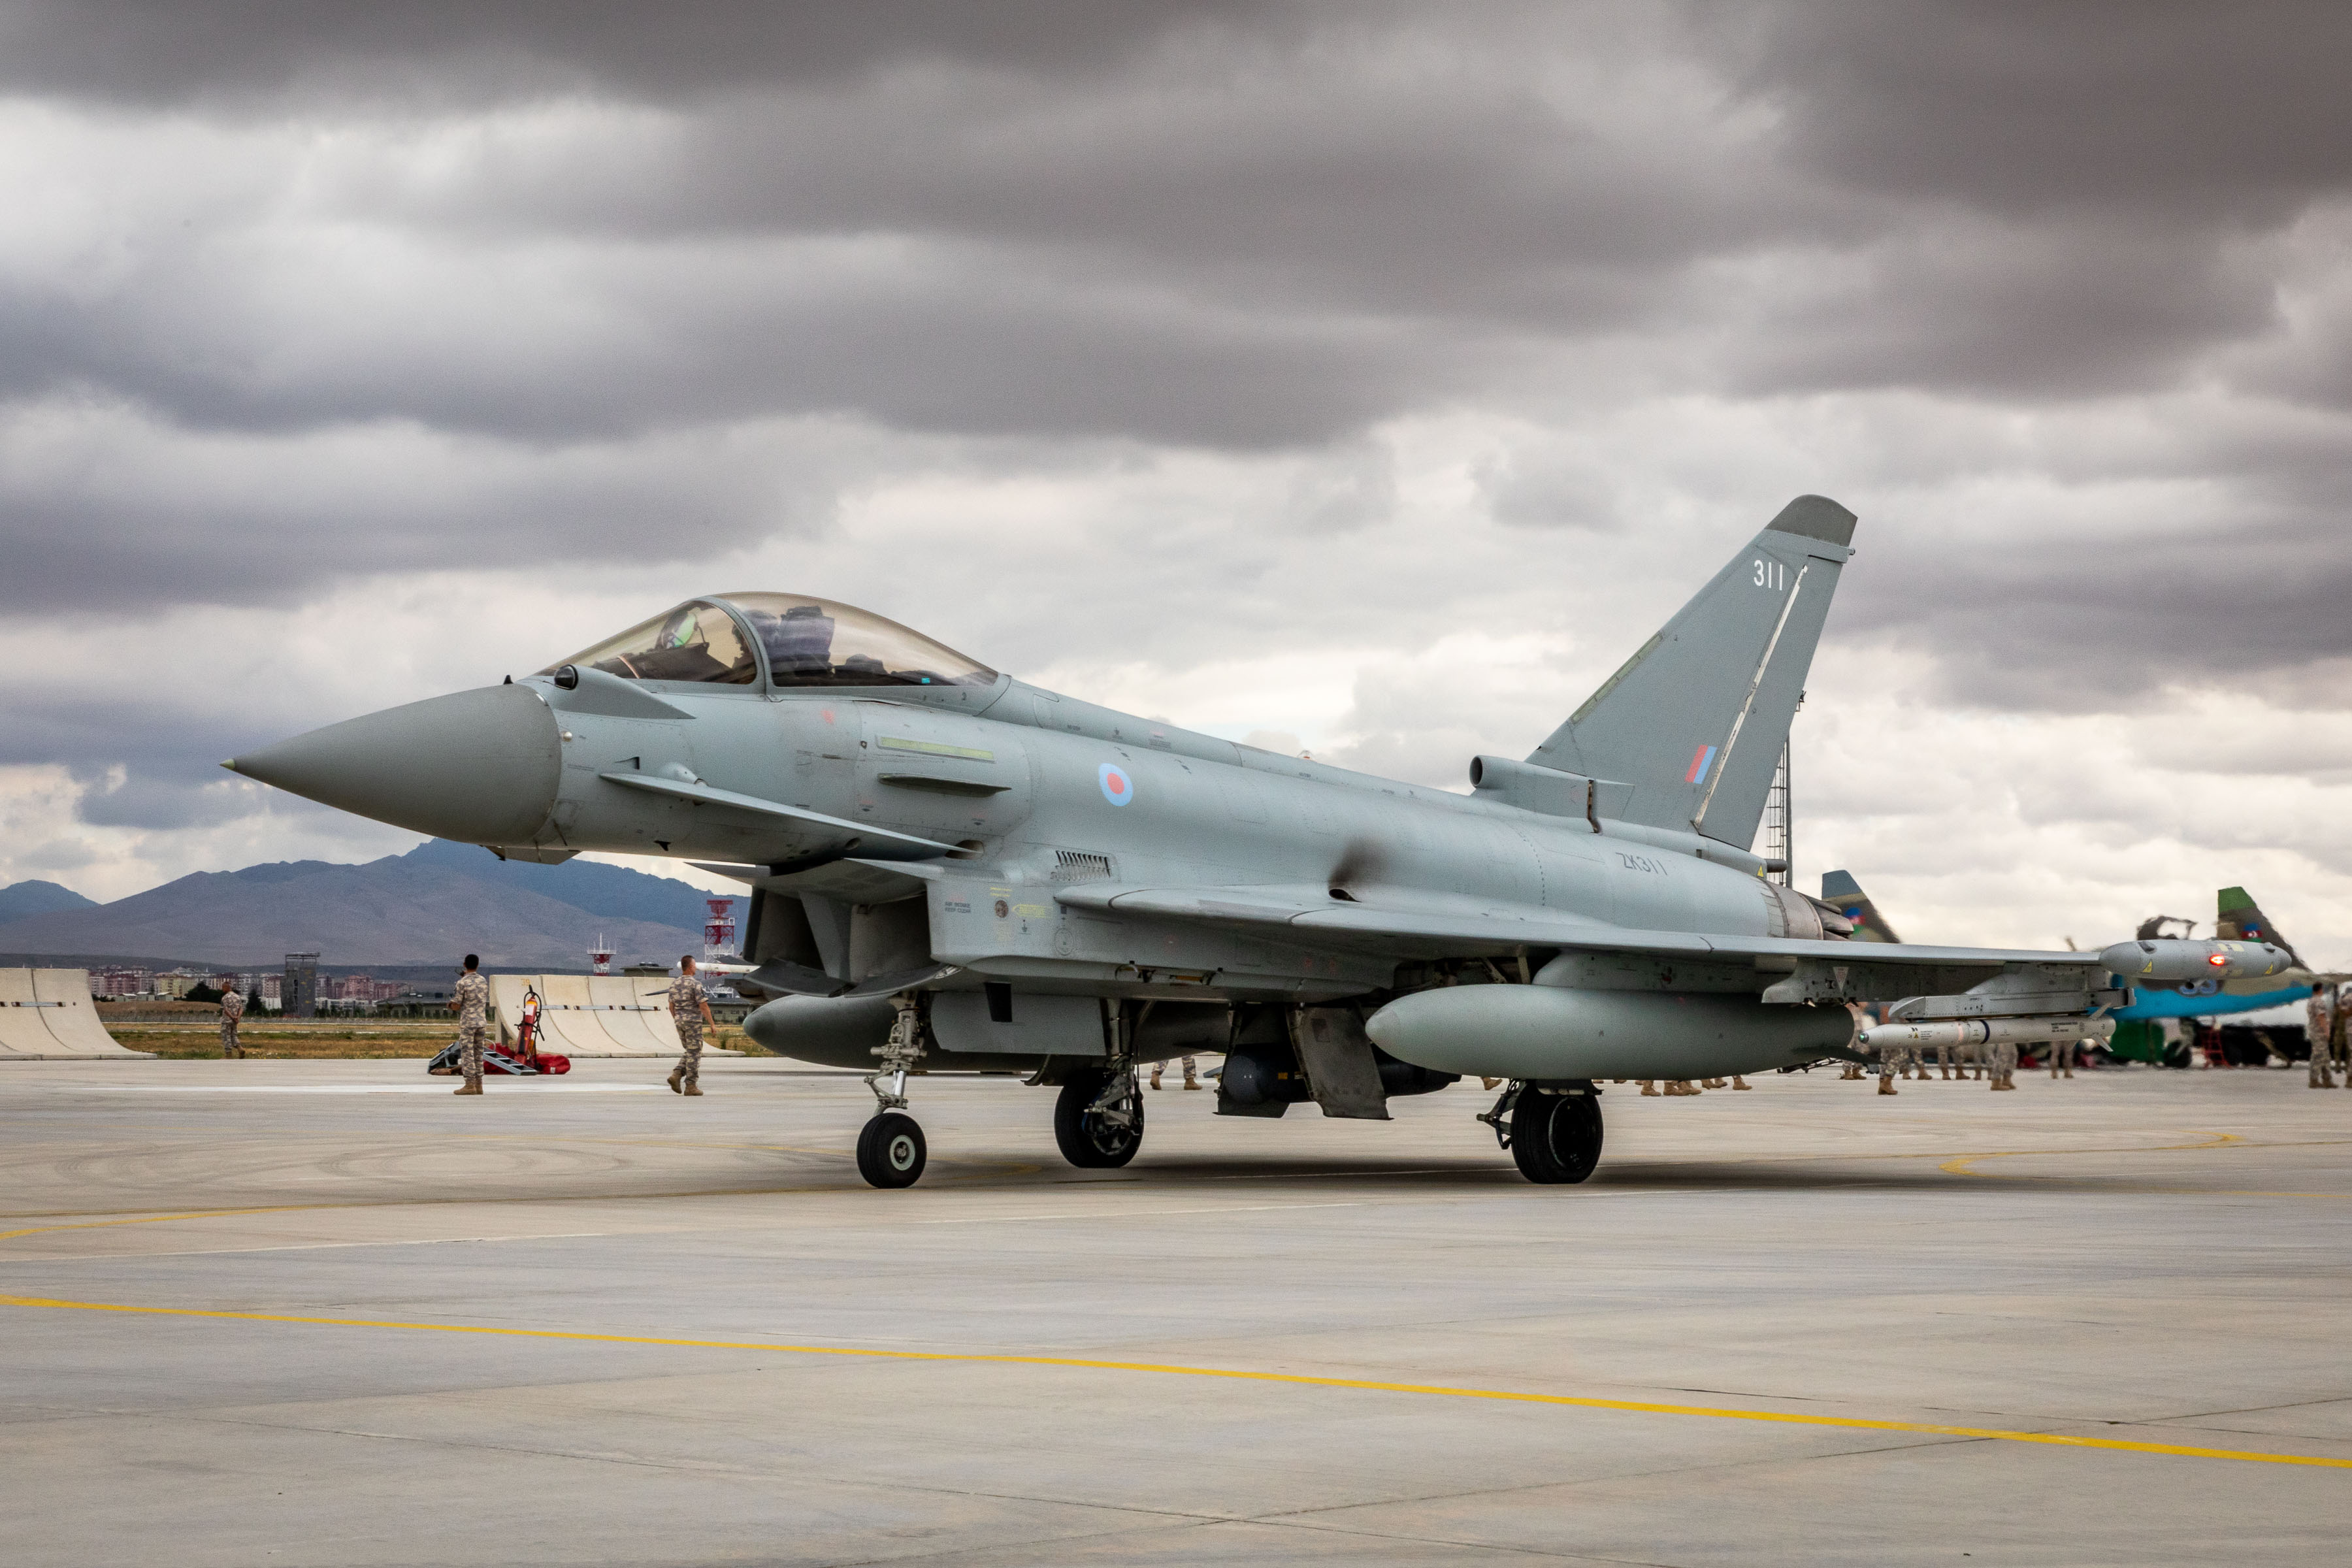 Image shows Typhoon aircraft on the airfield.